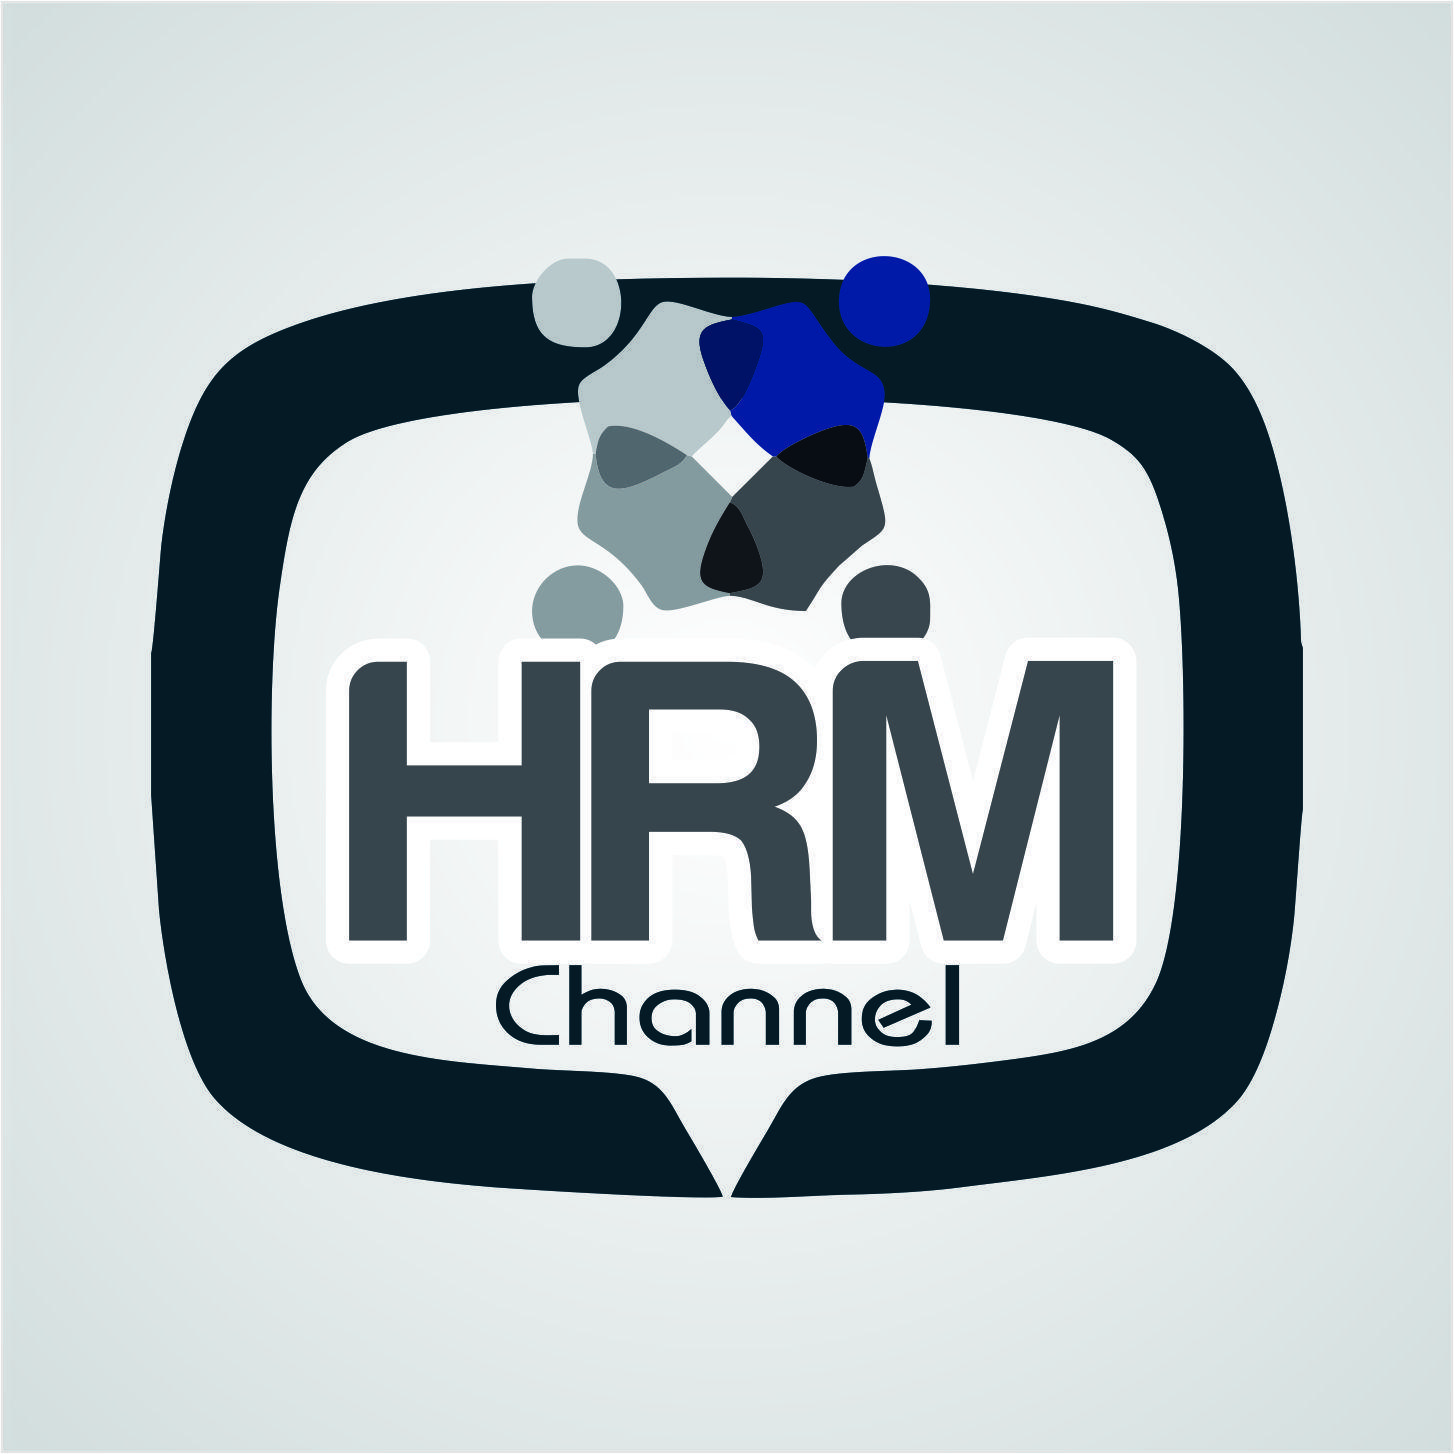 HRM Logo - Bold, Serious, Consulting Logo Design for HRM Channel by Jcarlos ...